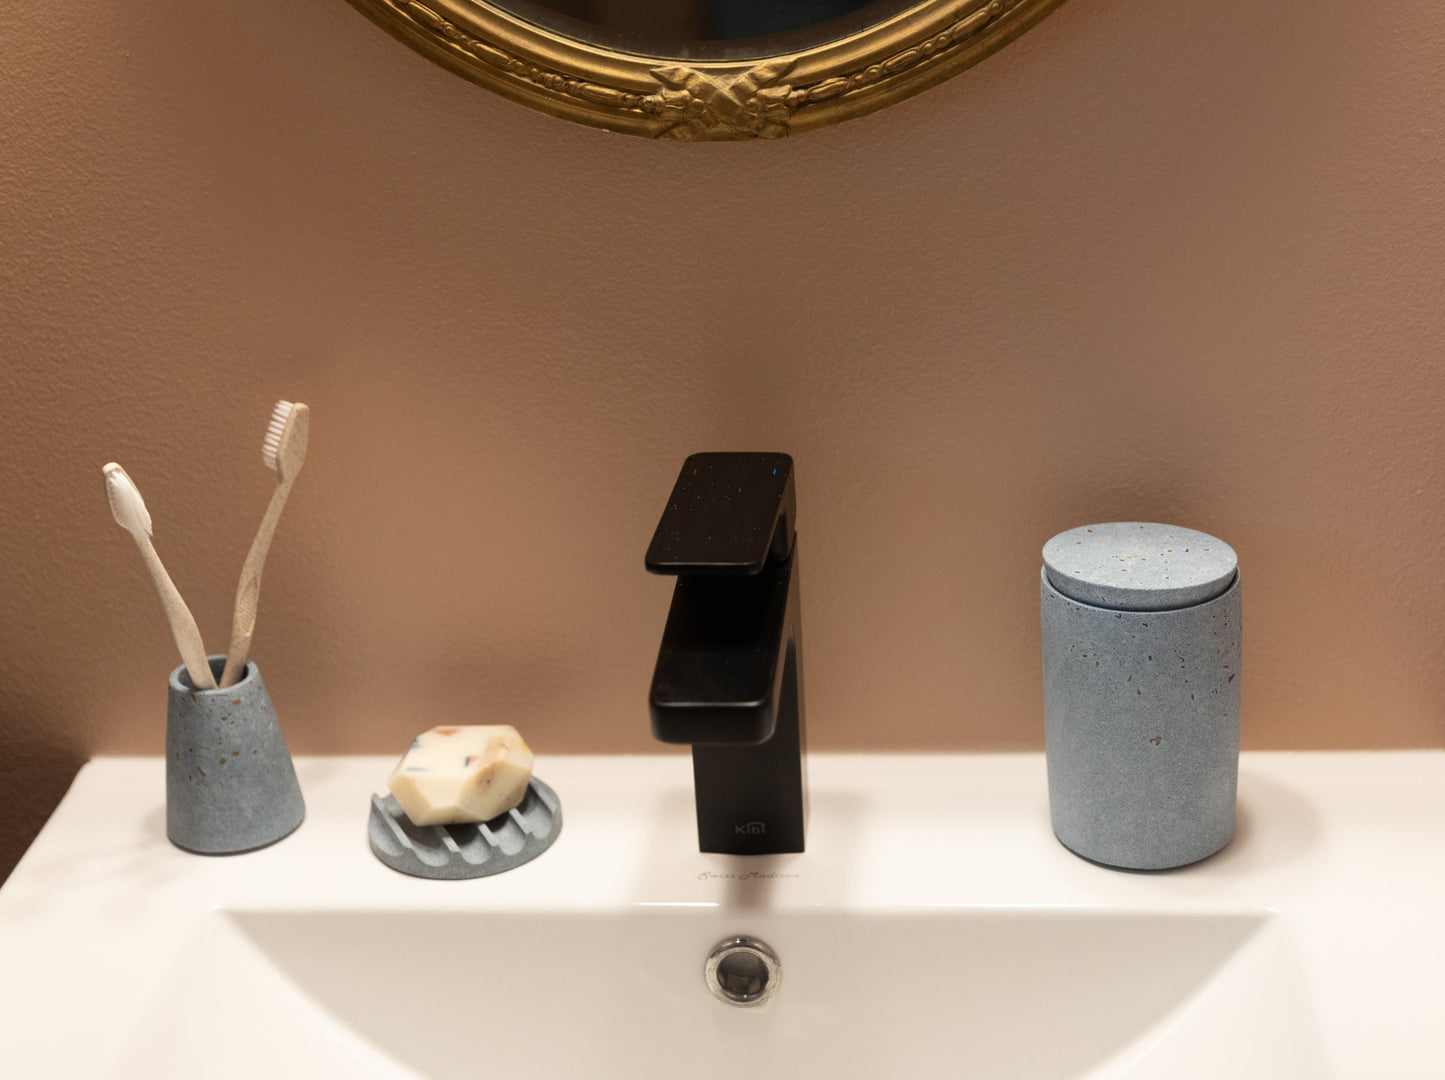 Cotton swab holder, paired with a toothbrush holder and mini soap dish, all in light blue terrazzo, styled by a sink.